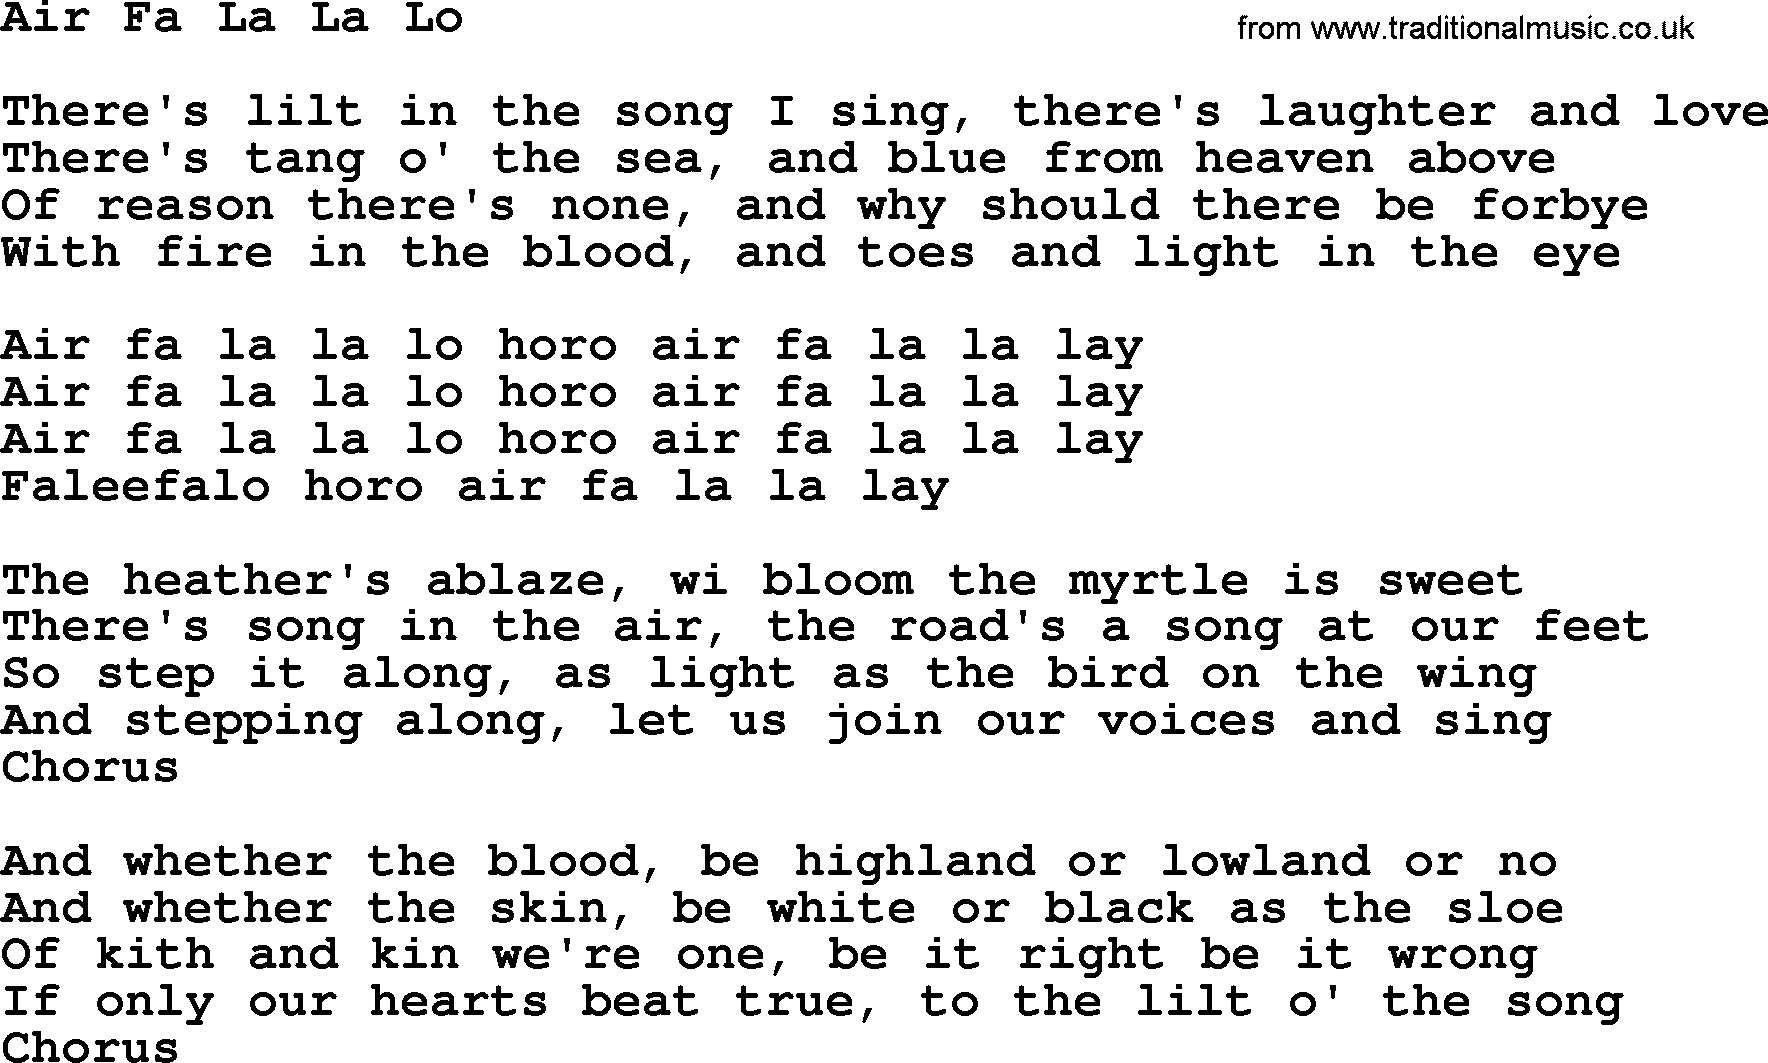 Air Fa La La Lo by The Dubliners - song lyrics and chords